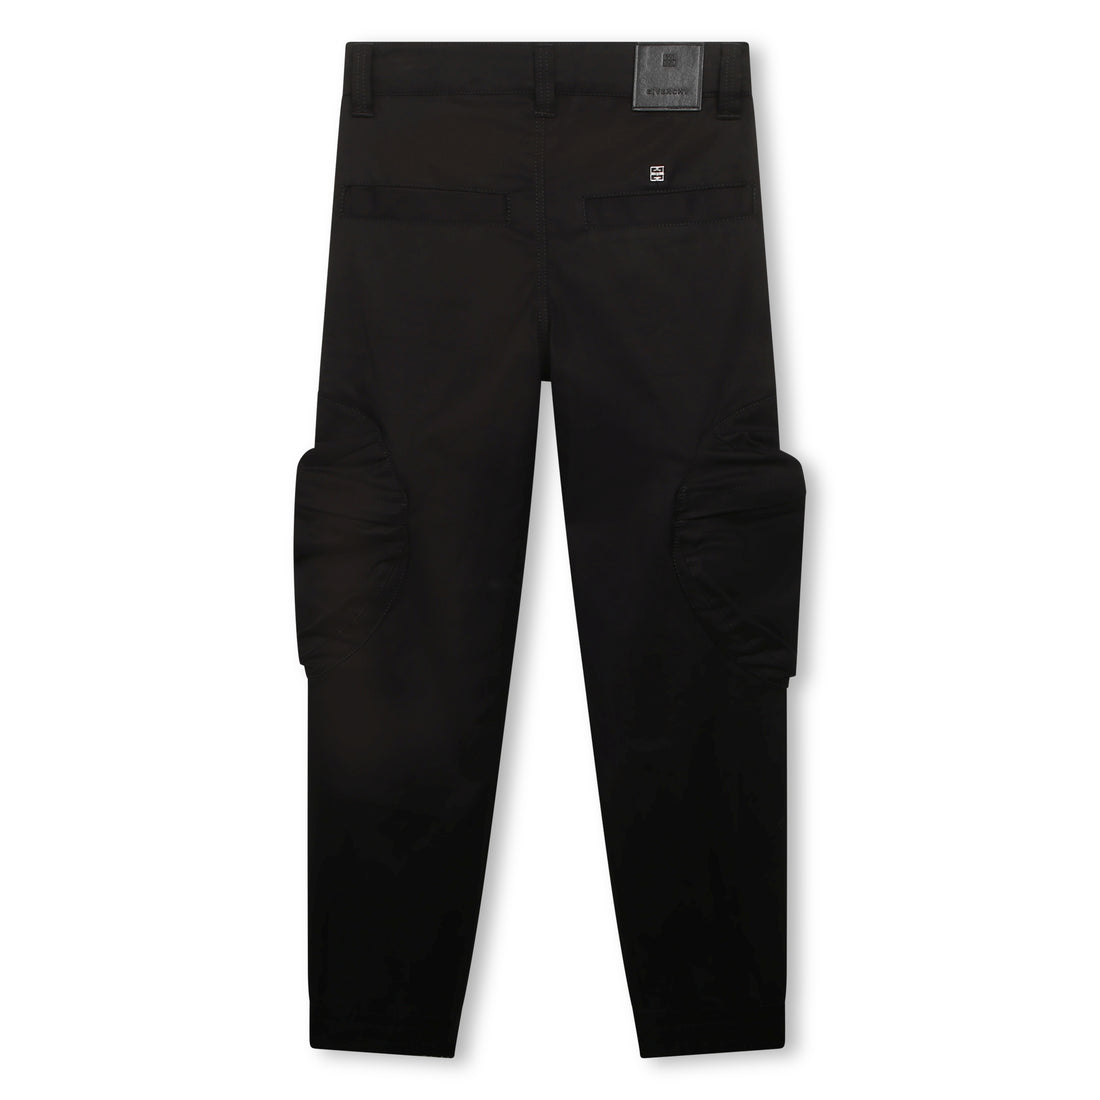 Givenchy Trousers Style: H24243